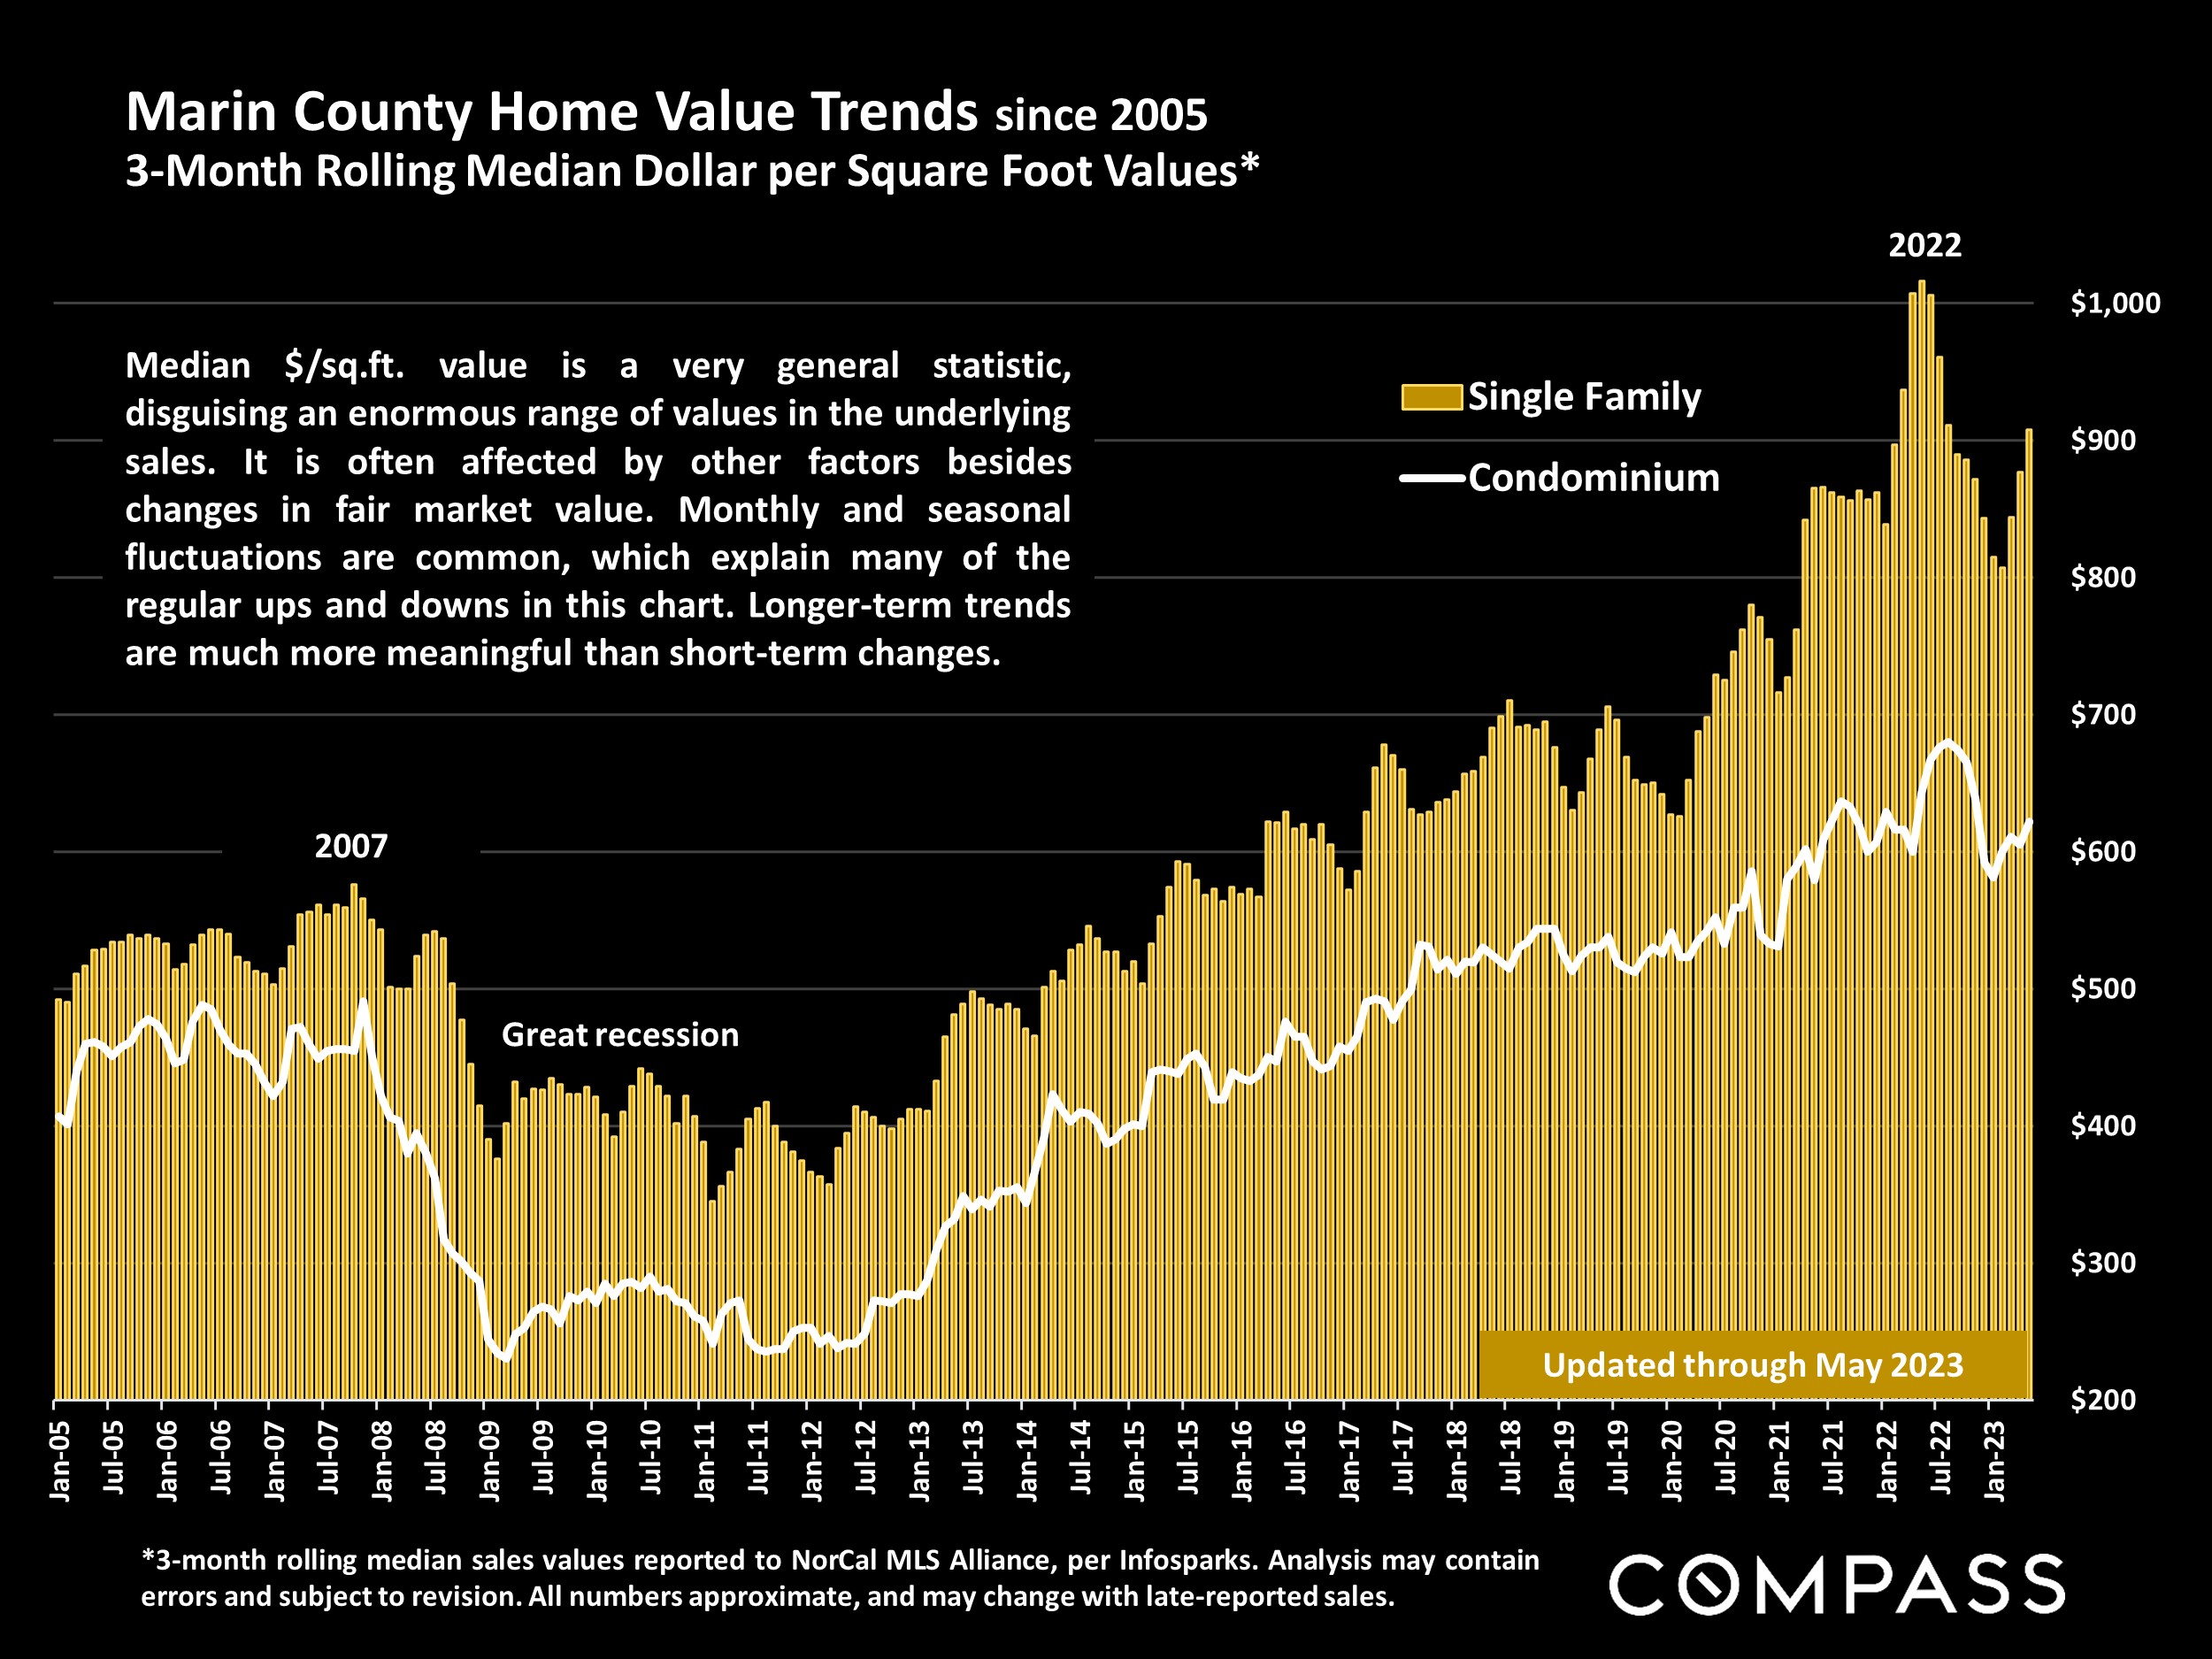 Marin County Home Value Trends since 2005